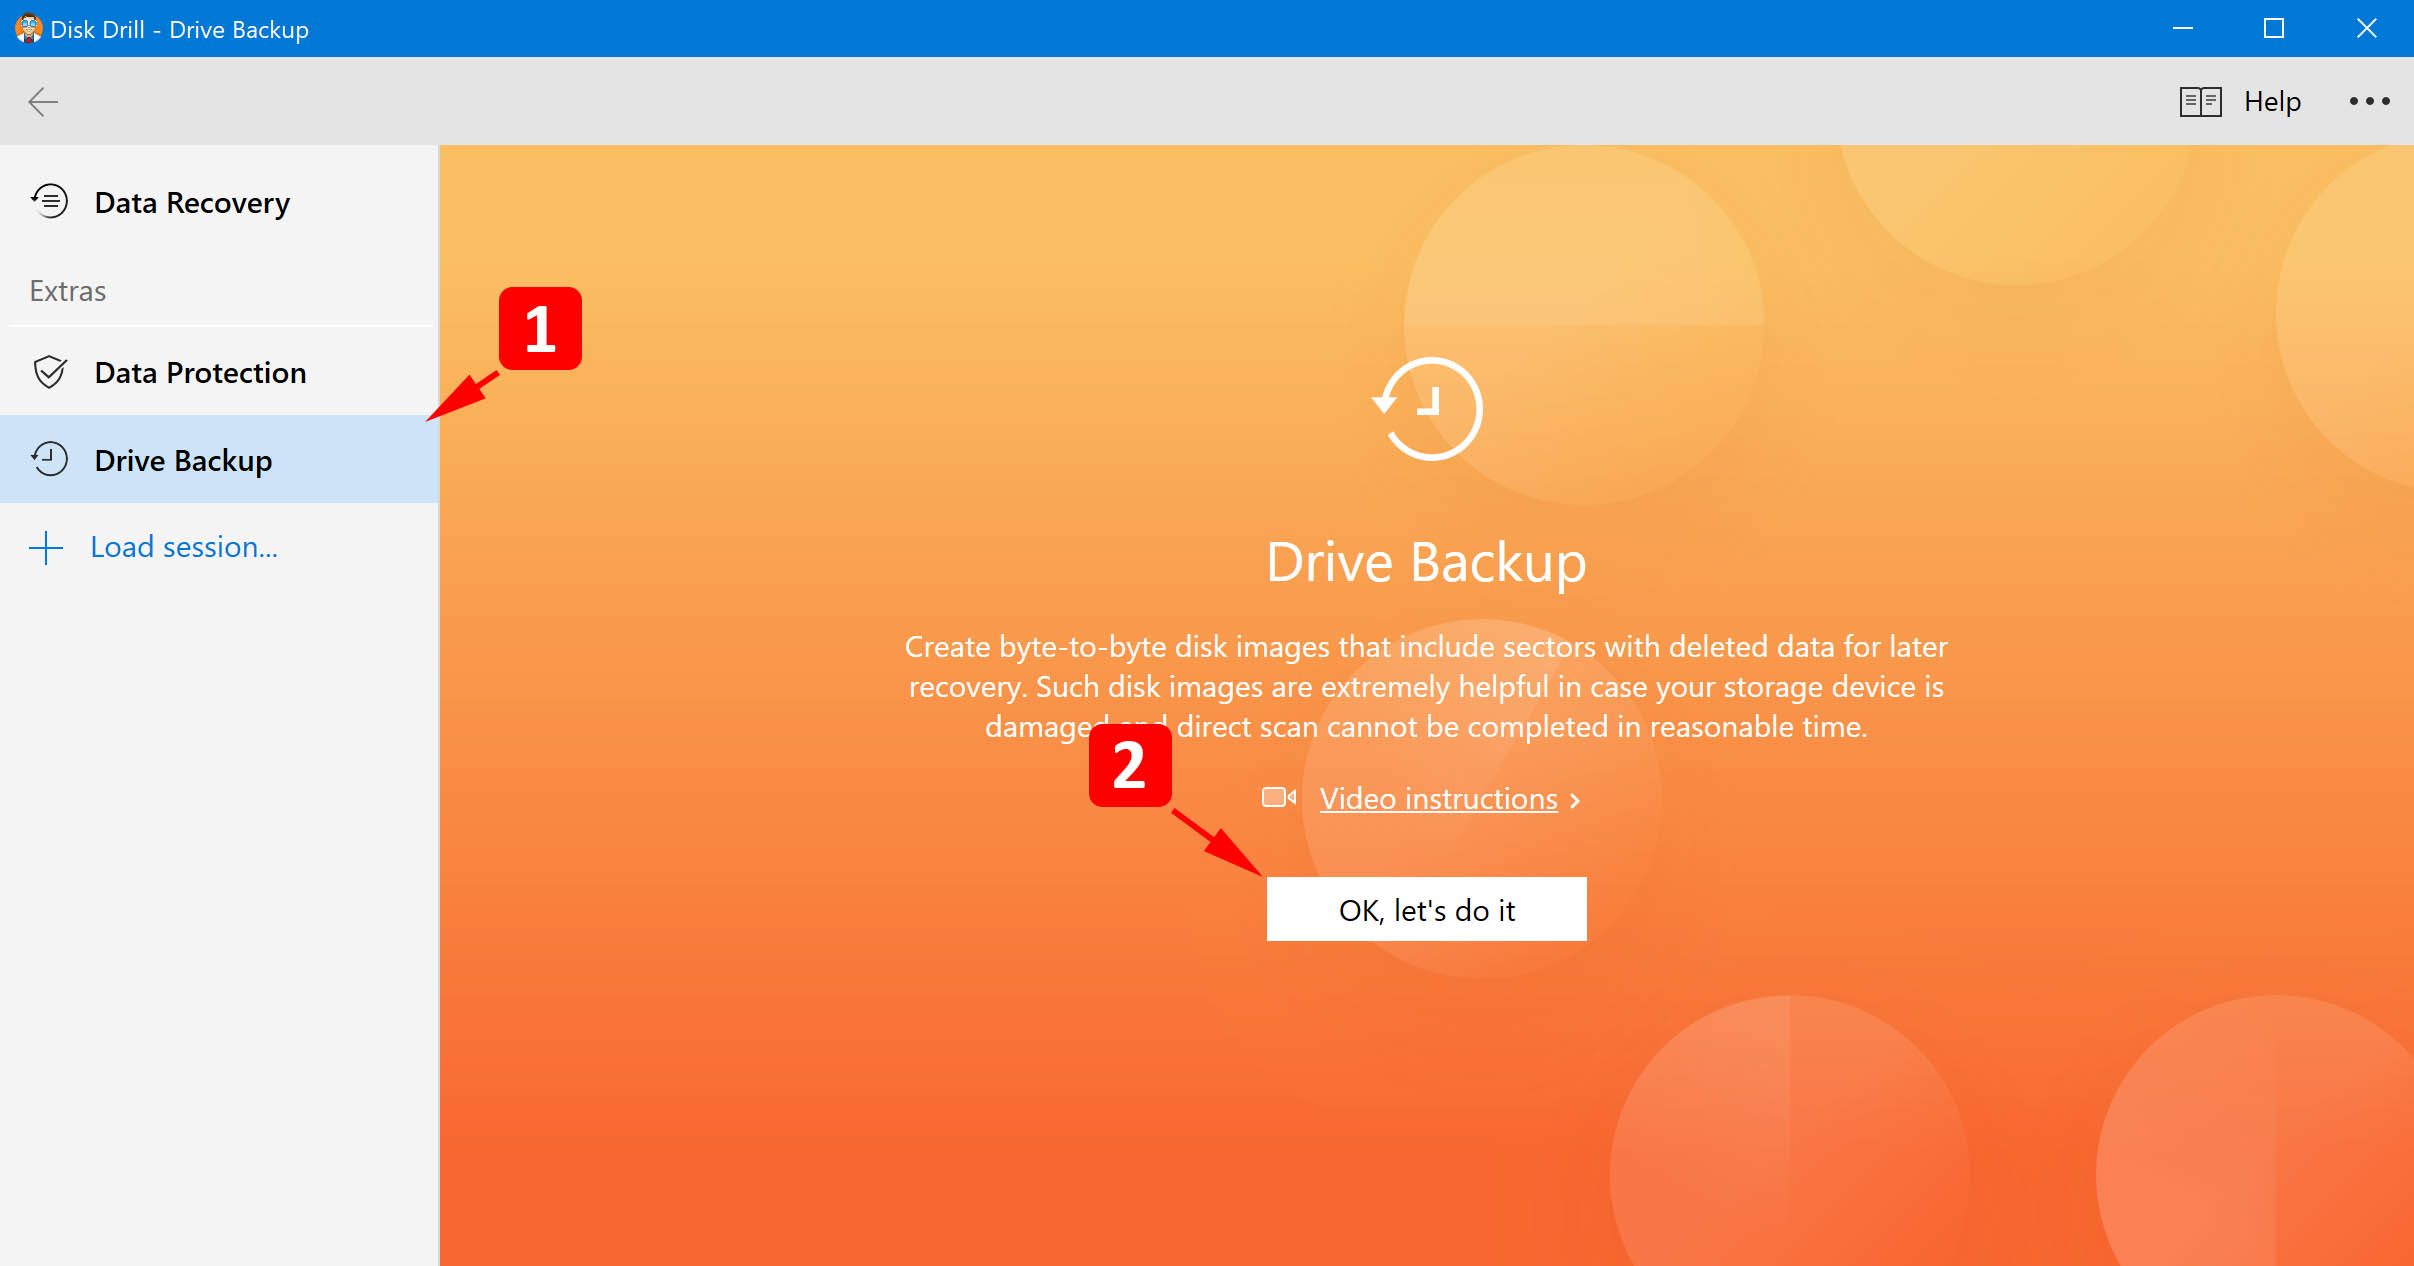 Accessing the drive backup screen